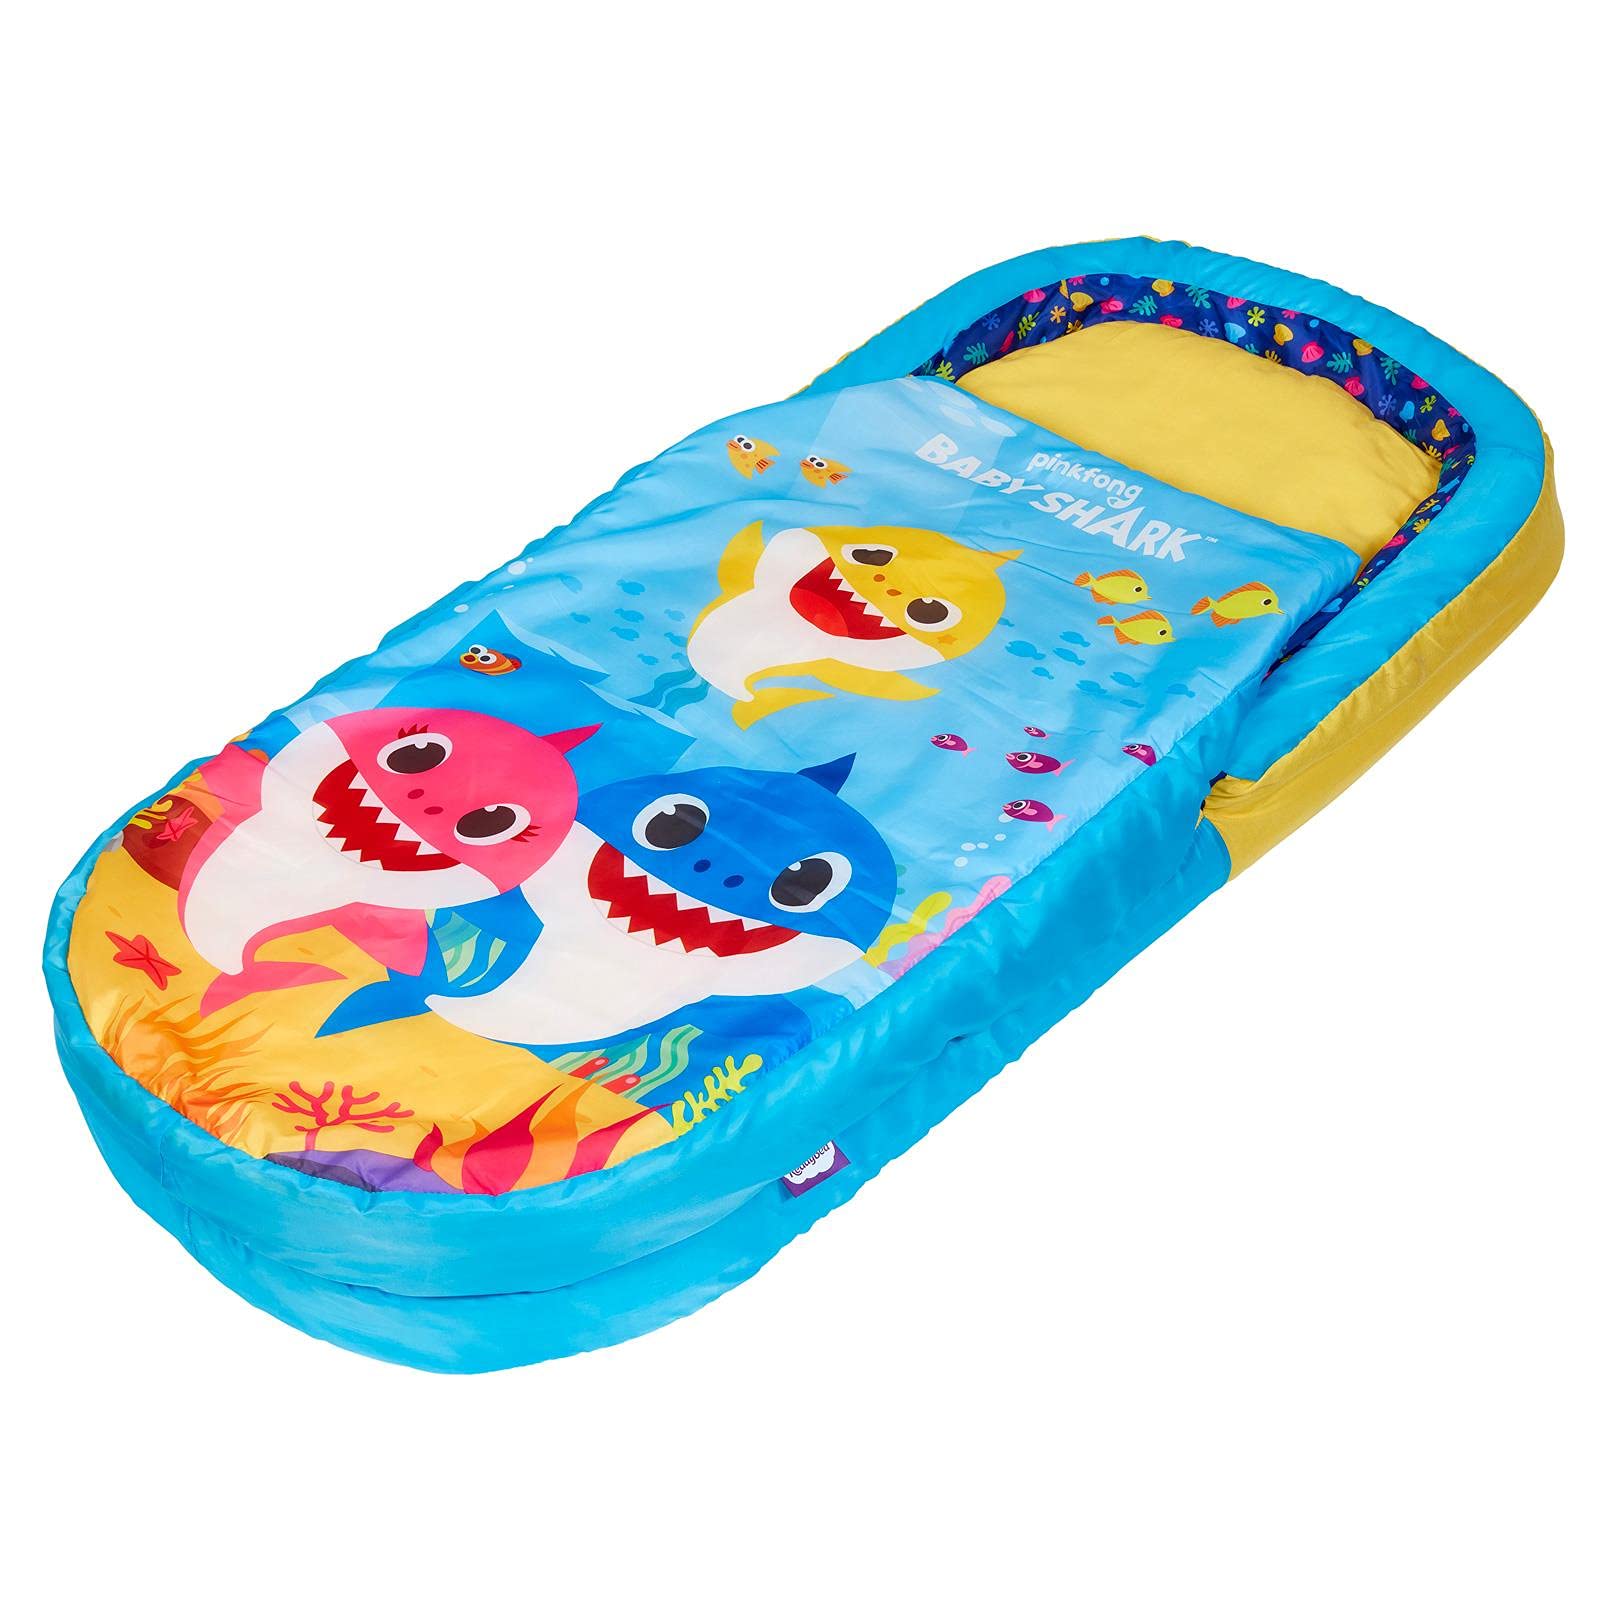 Baby Shark My First ReadyBed - 2 in 1 toddler sleeping bag and inflatable air bed in a bag with a pump